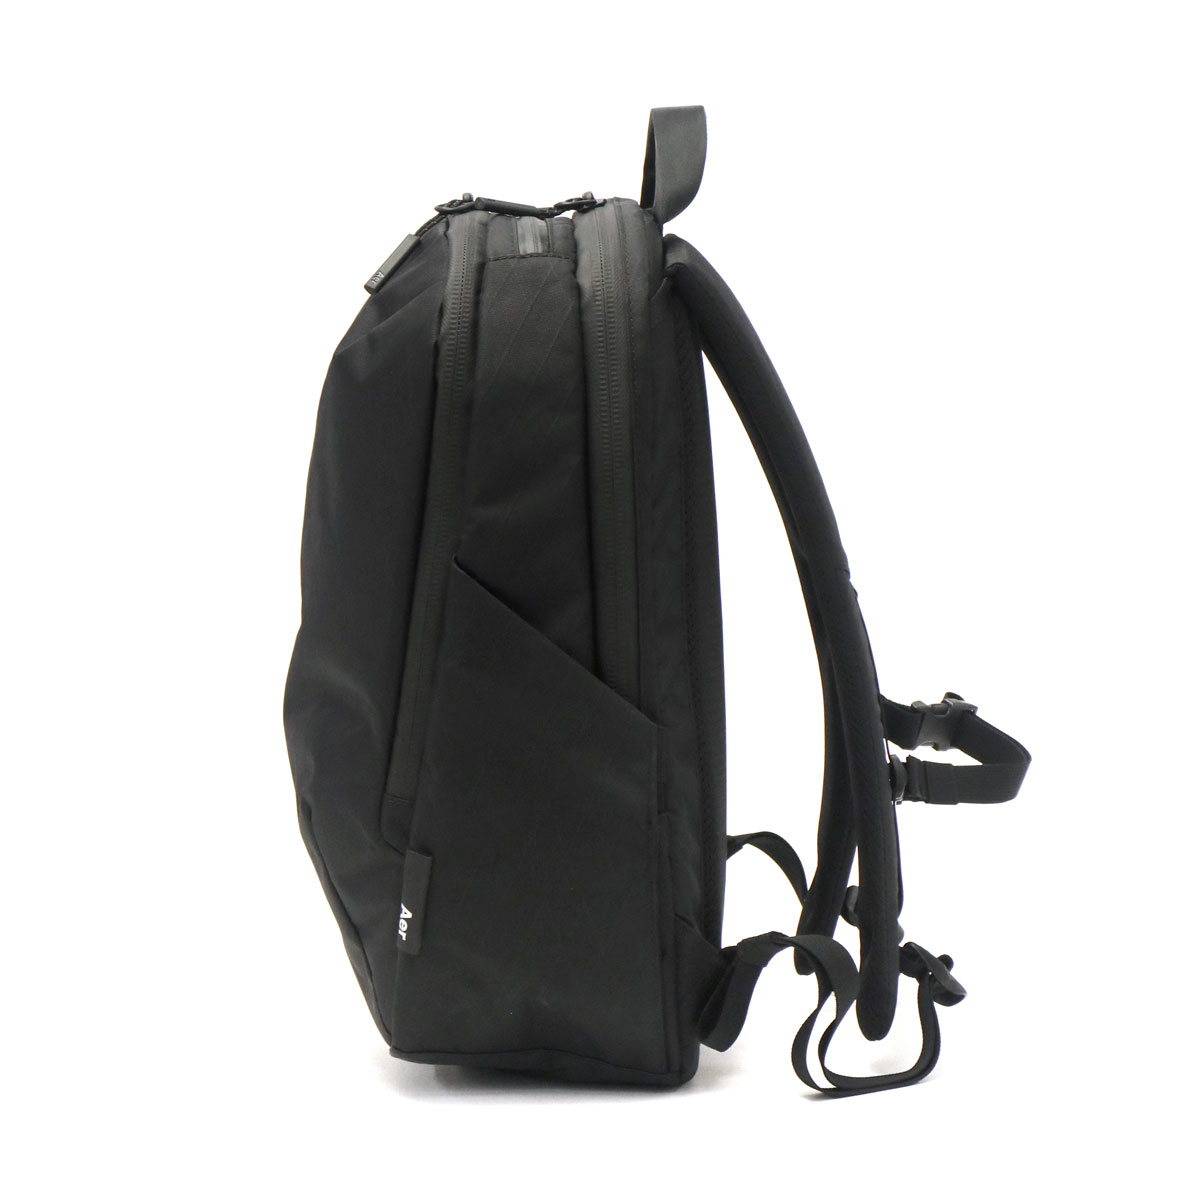 Aer エアー Work Collection Day Pack 2 X-PAC リュック 14.8L｜【正規